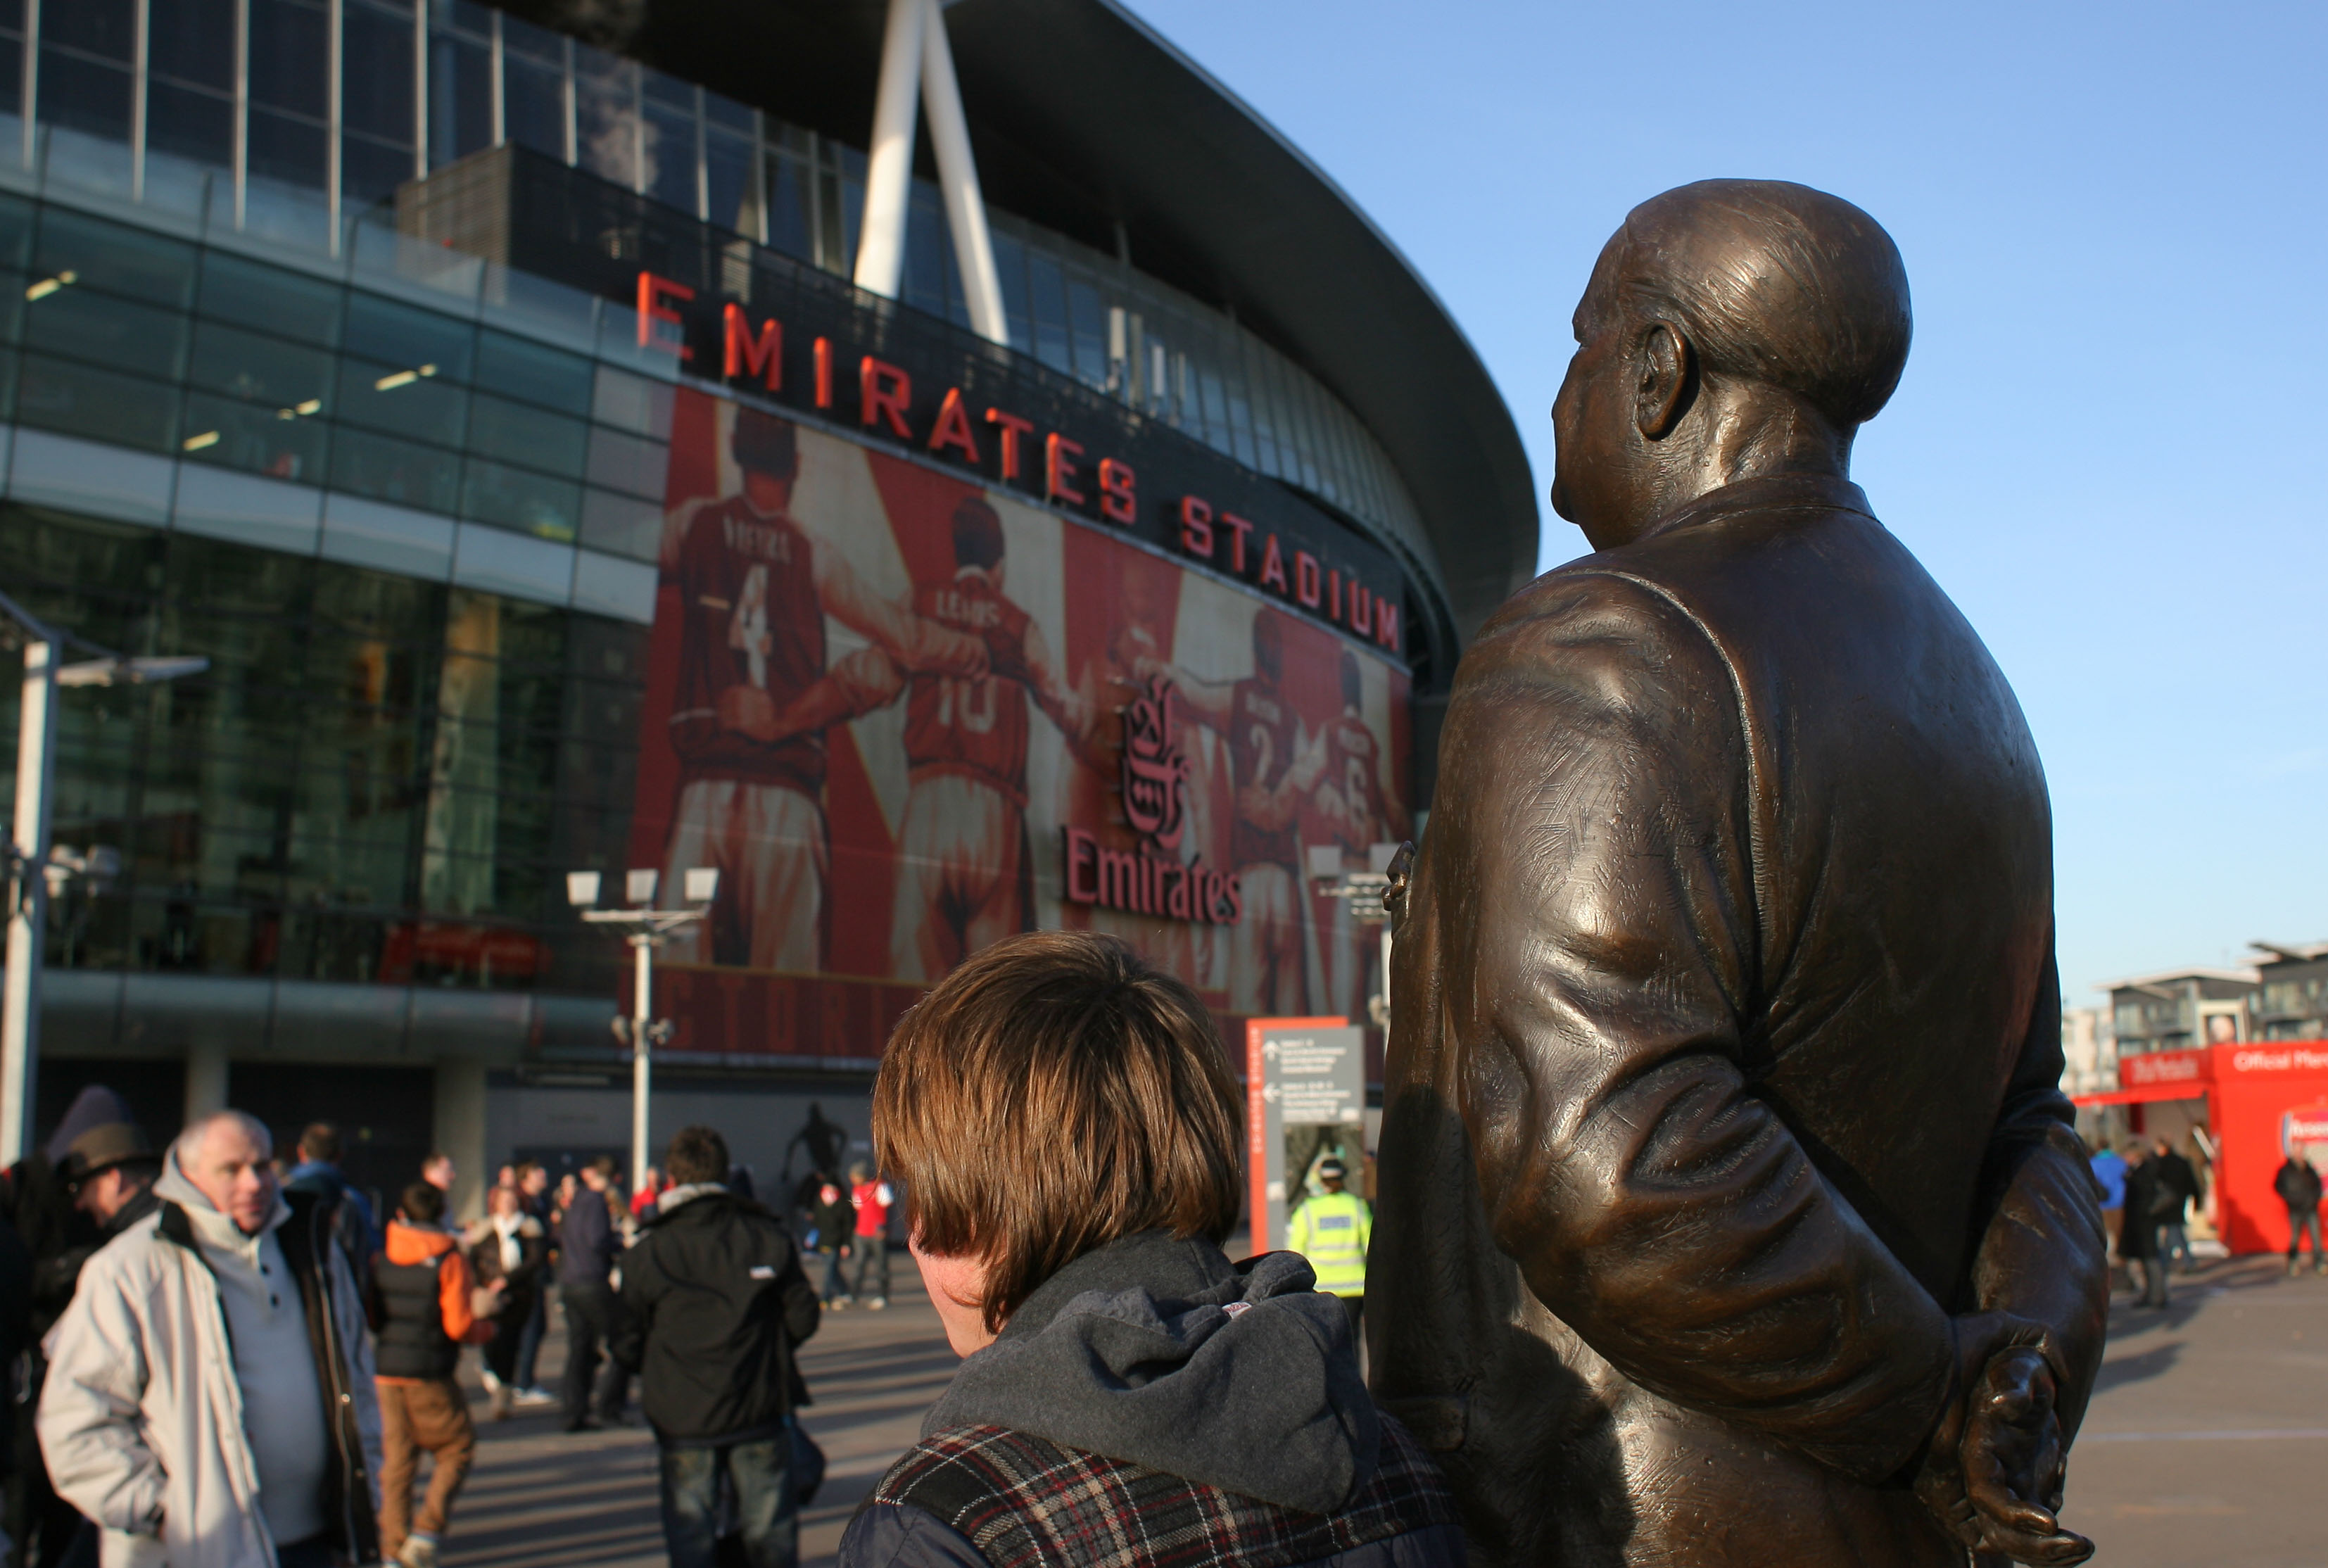 Arsenal managerial legend and innovator Herbert Chapman died on this day in 1934